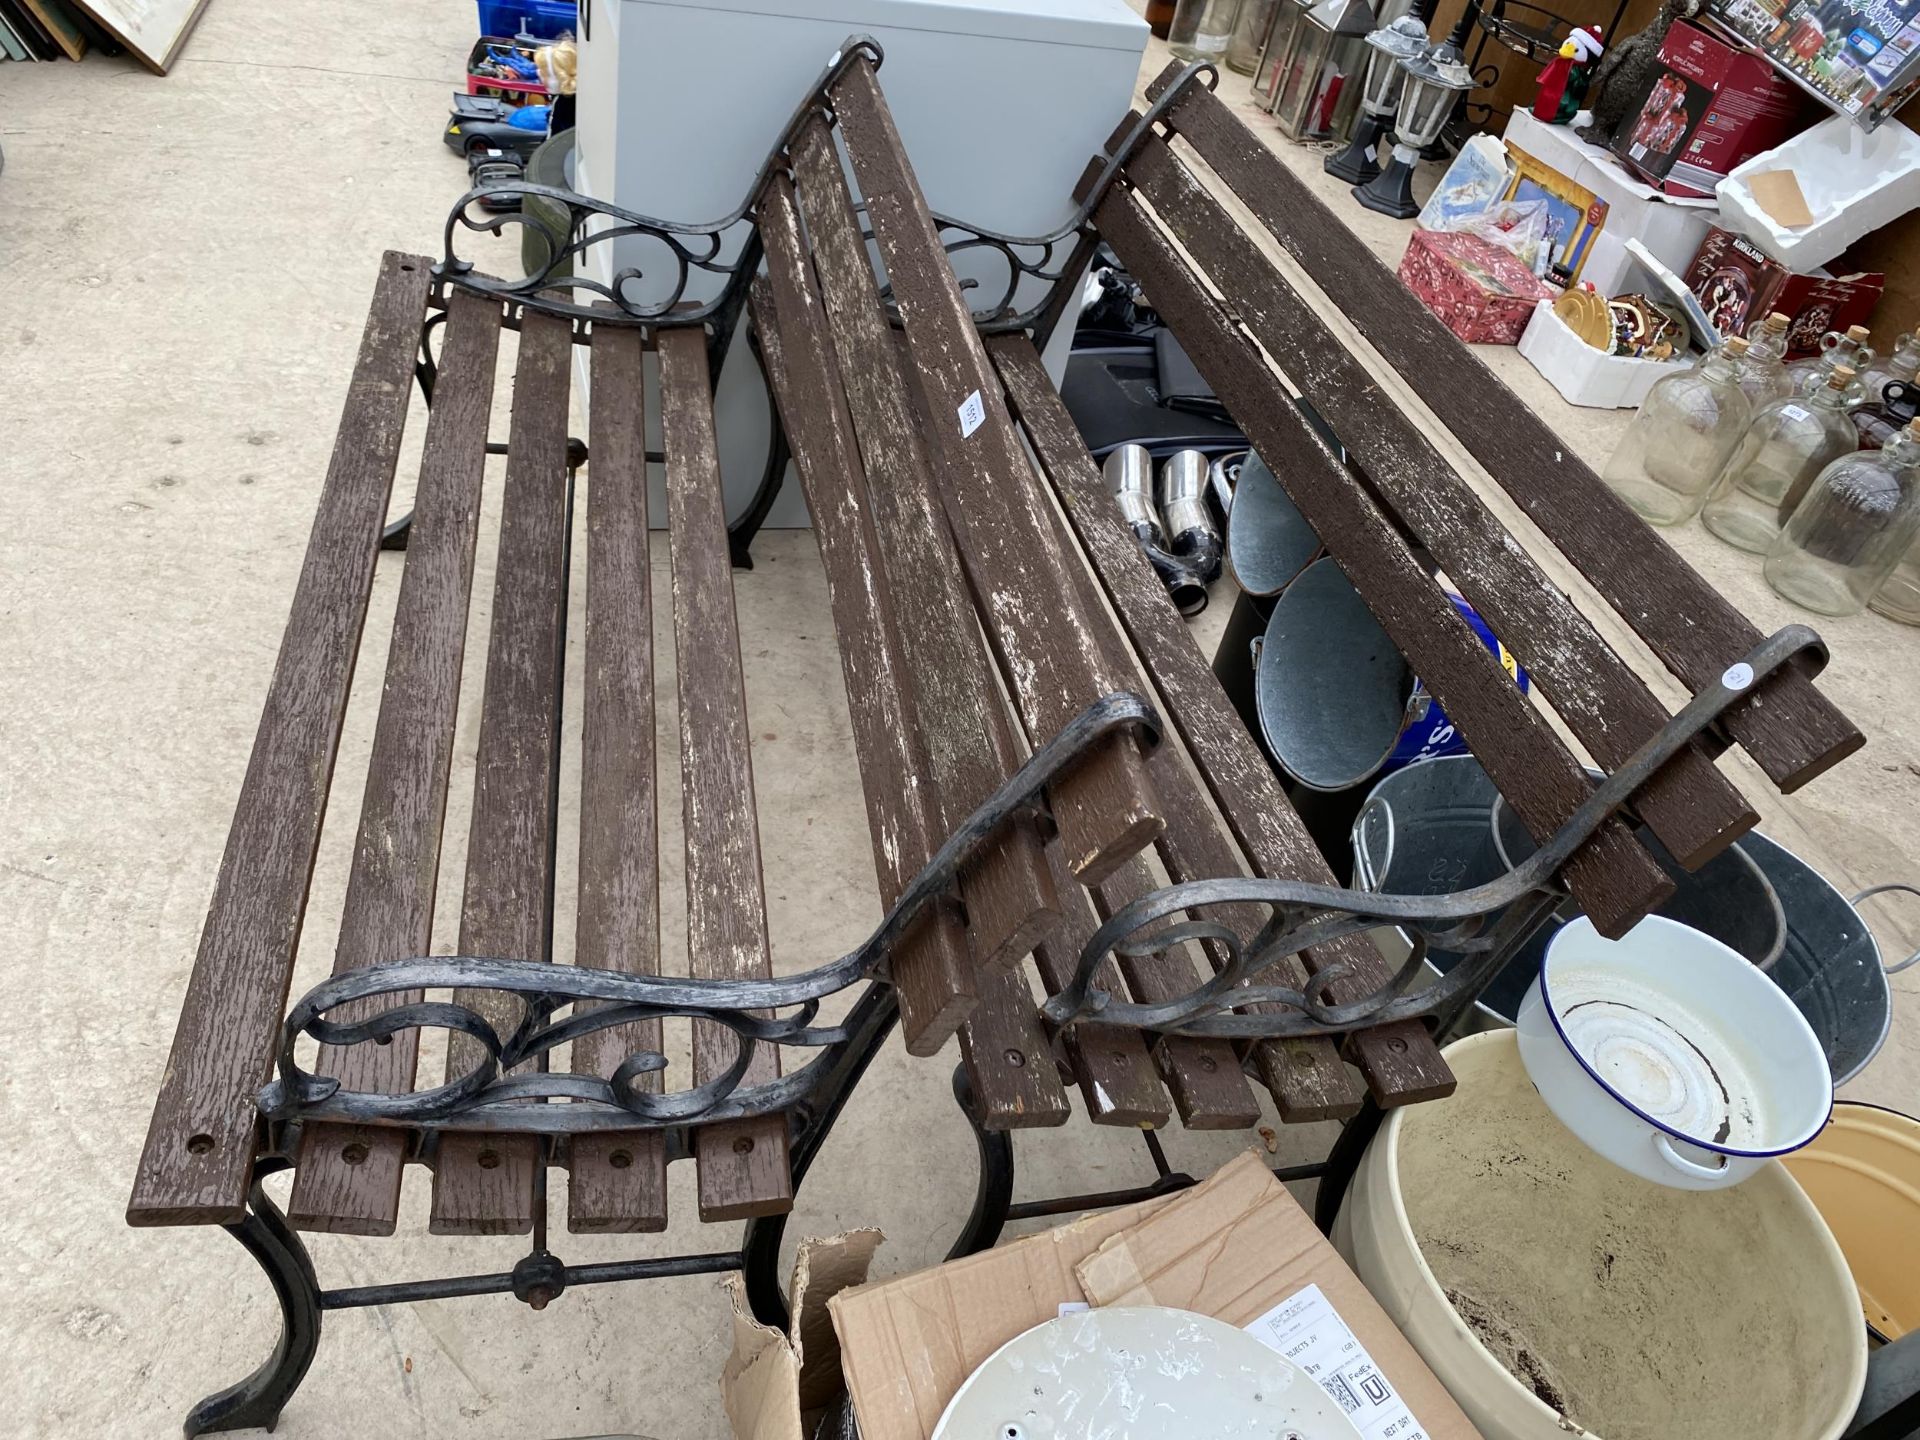 A PAIR OF WOODEN SLATTED GARDEN BENCHES WITH CAST BENCH ENDS - Image 2 of 2